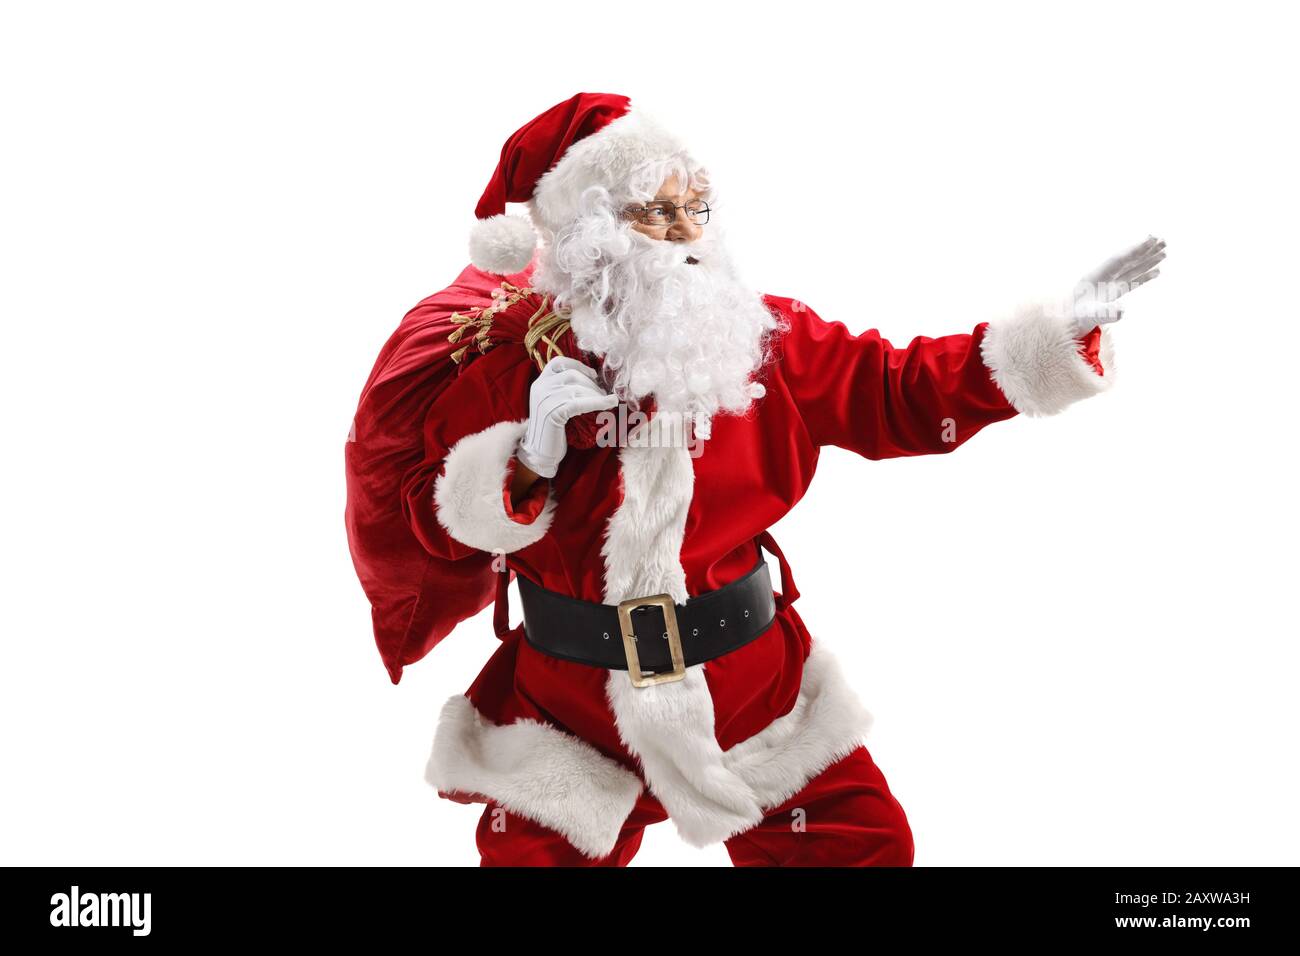 Santa Claus with a sack in a hurry gesturing with hand isolated on white background Stock Photo